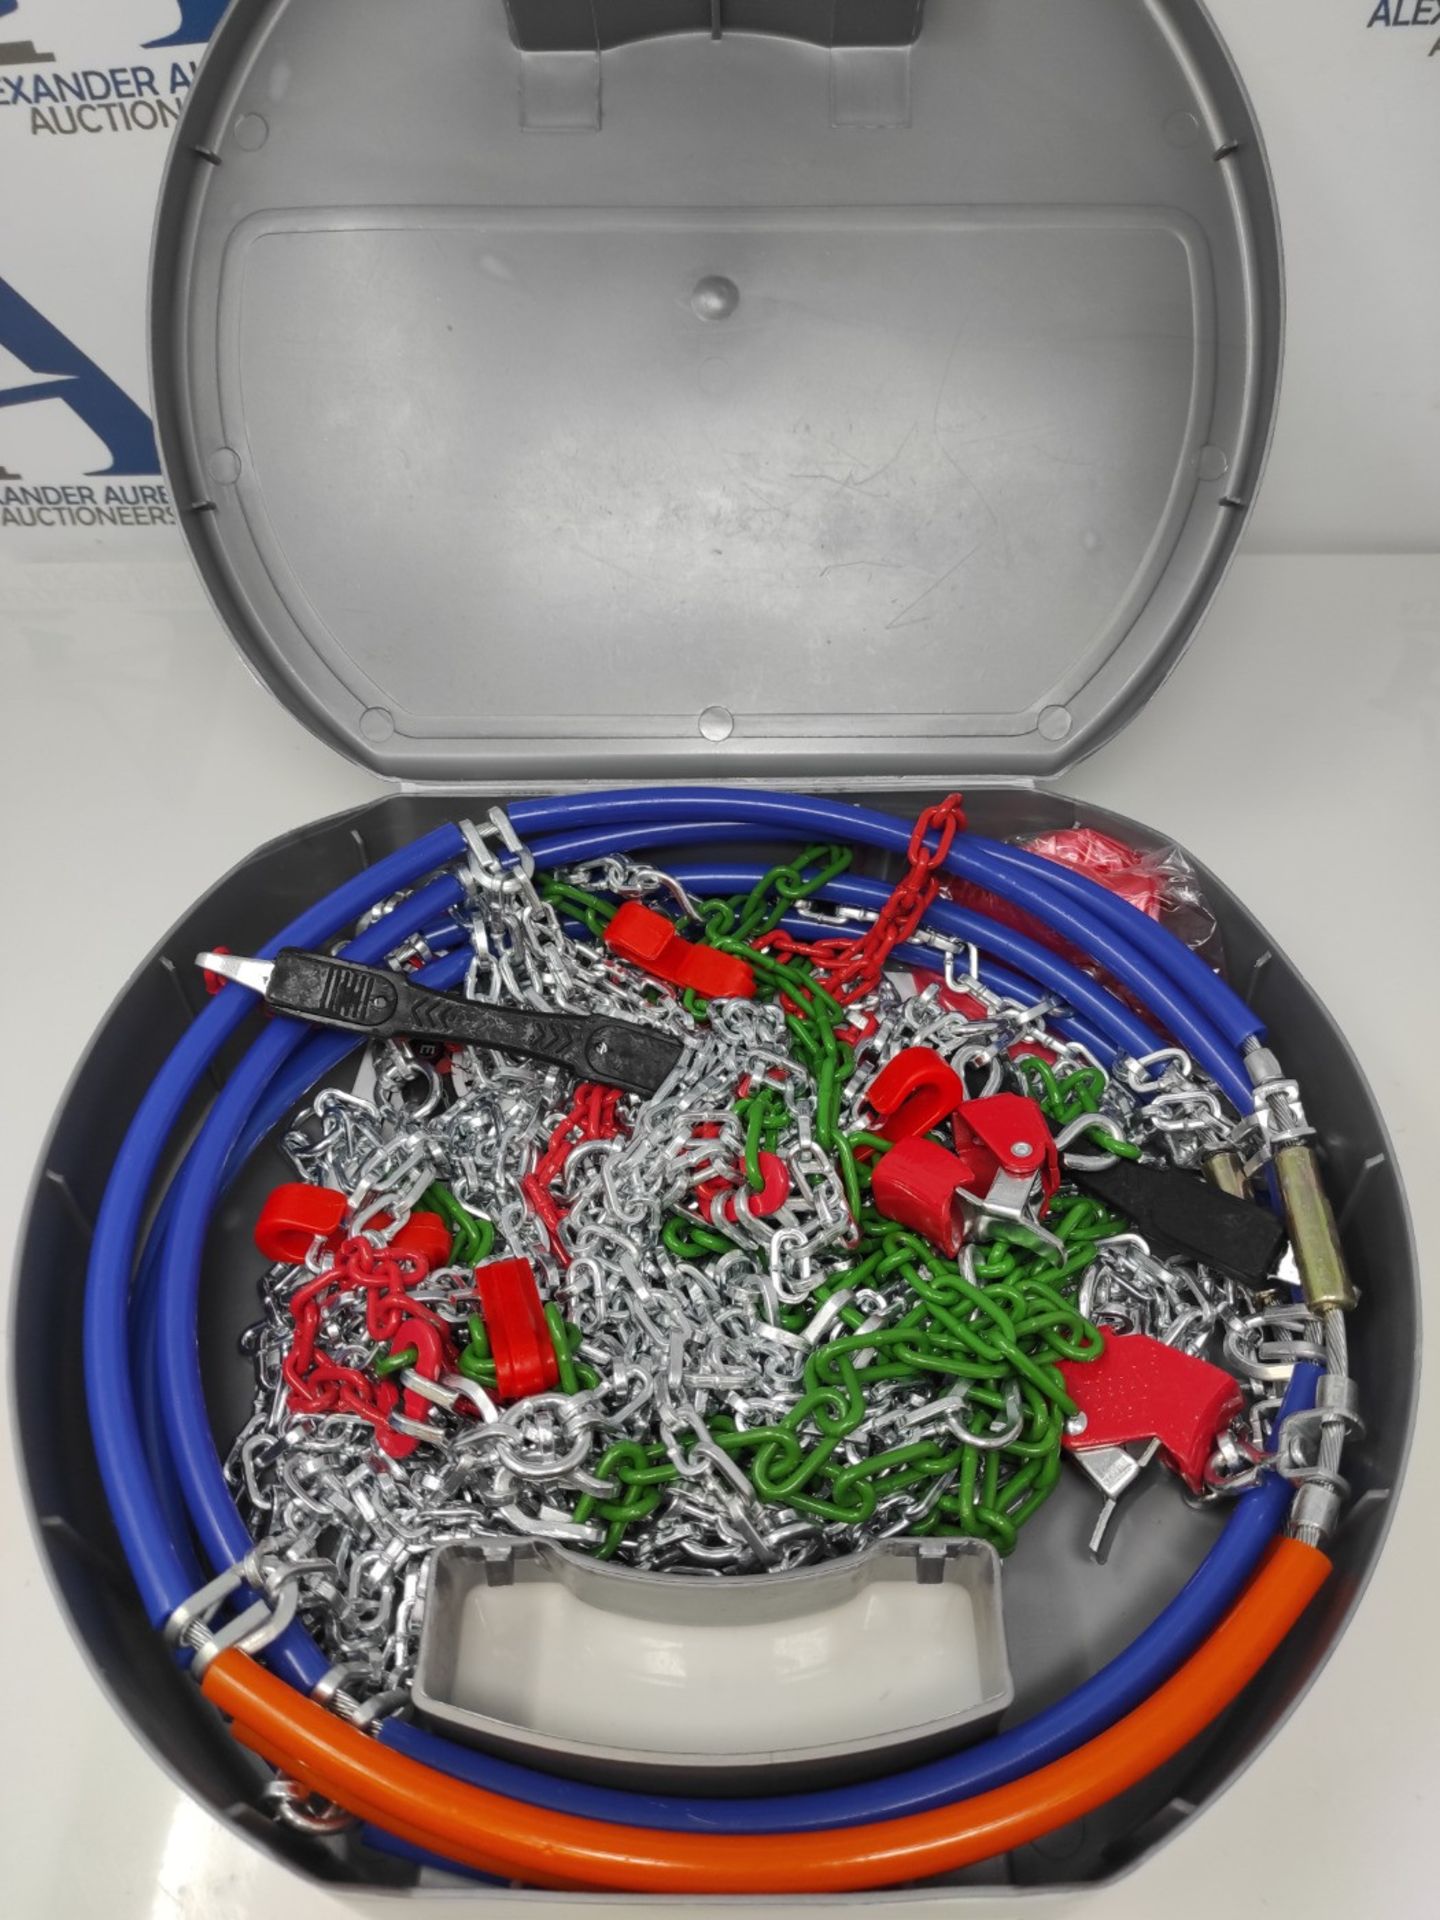 RD9 - Metal snow chains, mm, size No. 90, 2 pieces, including gloves. - Image 3 of 6